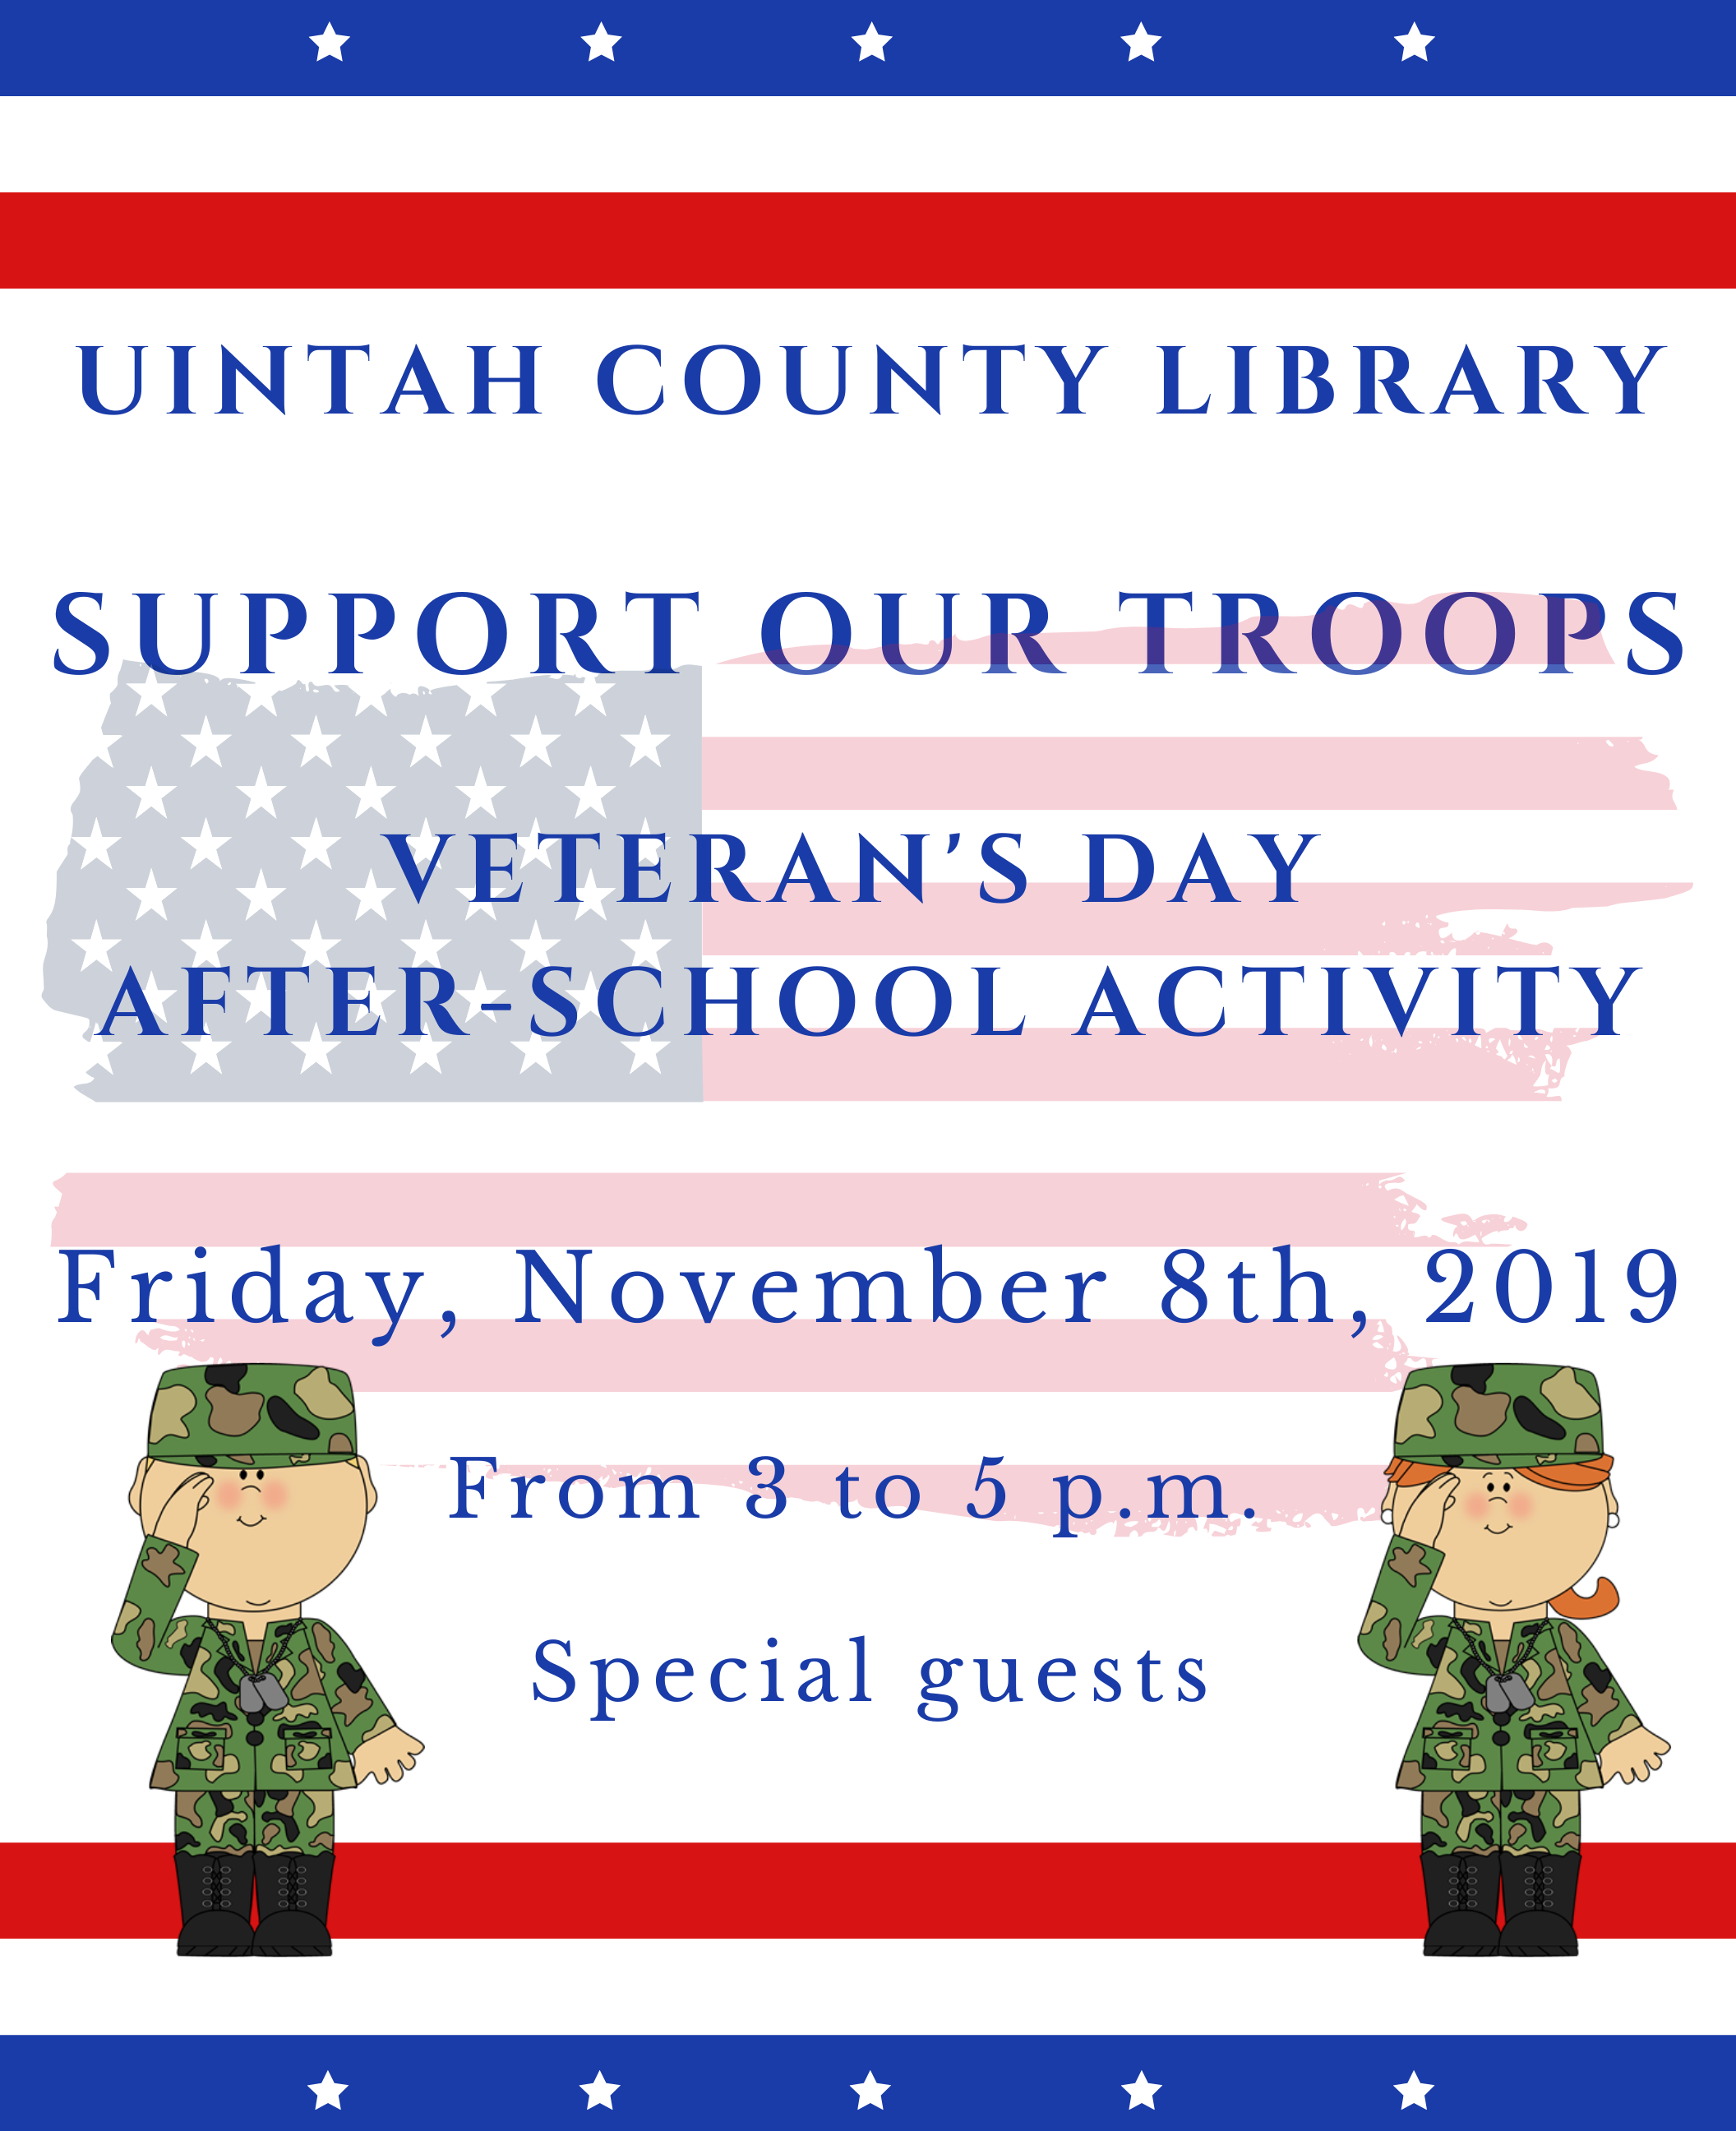 Image Text reads: Uintah County Library Support Out Troops Veteran's Day After-School Activity Friday, November 8th, 2019 From 3 to 5 p.m. special guests, image also displays an american flag, patriotic banners, stars, and clipart of children dressed as soldiers